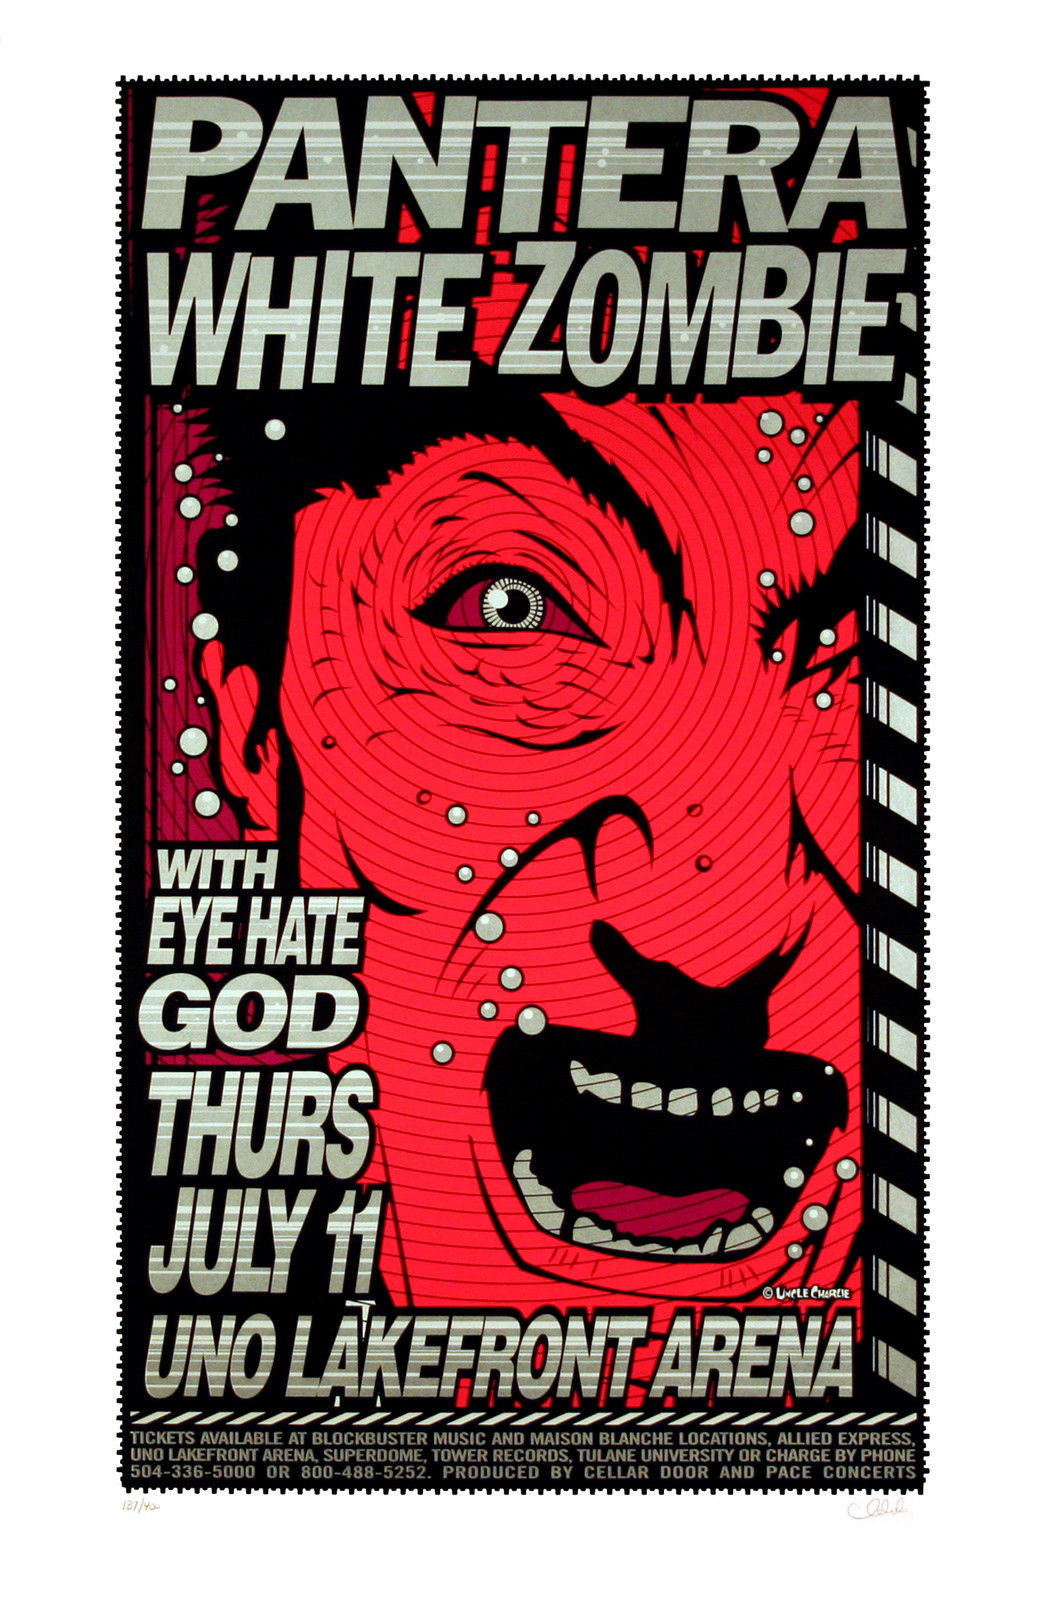 Uncle Charlie - 1996 - Pantera / White Zombie Concert Poster